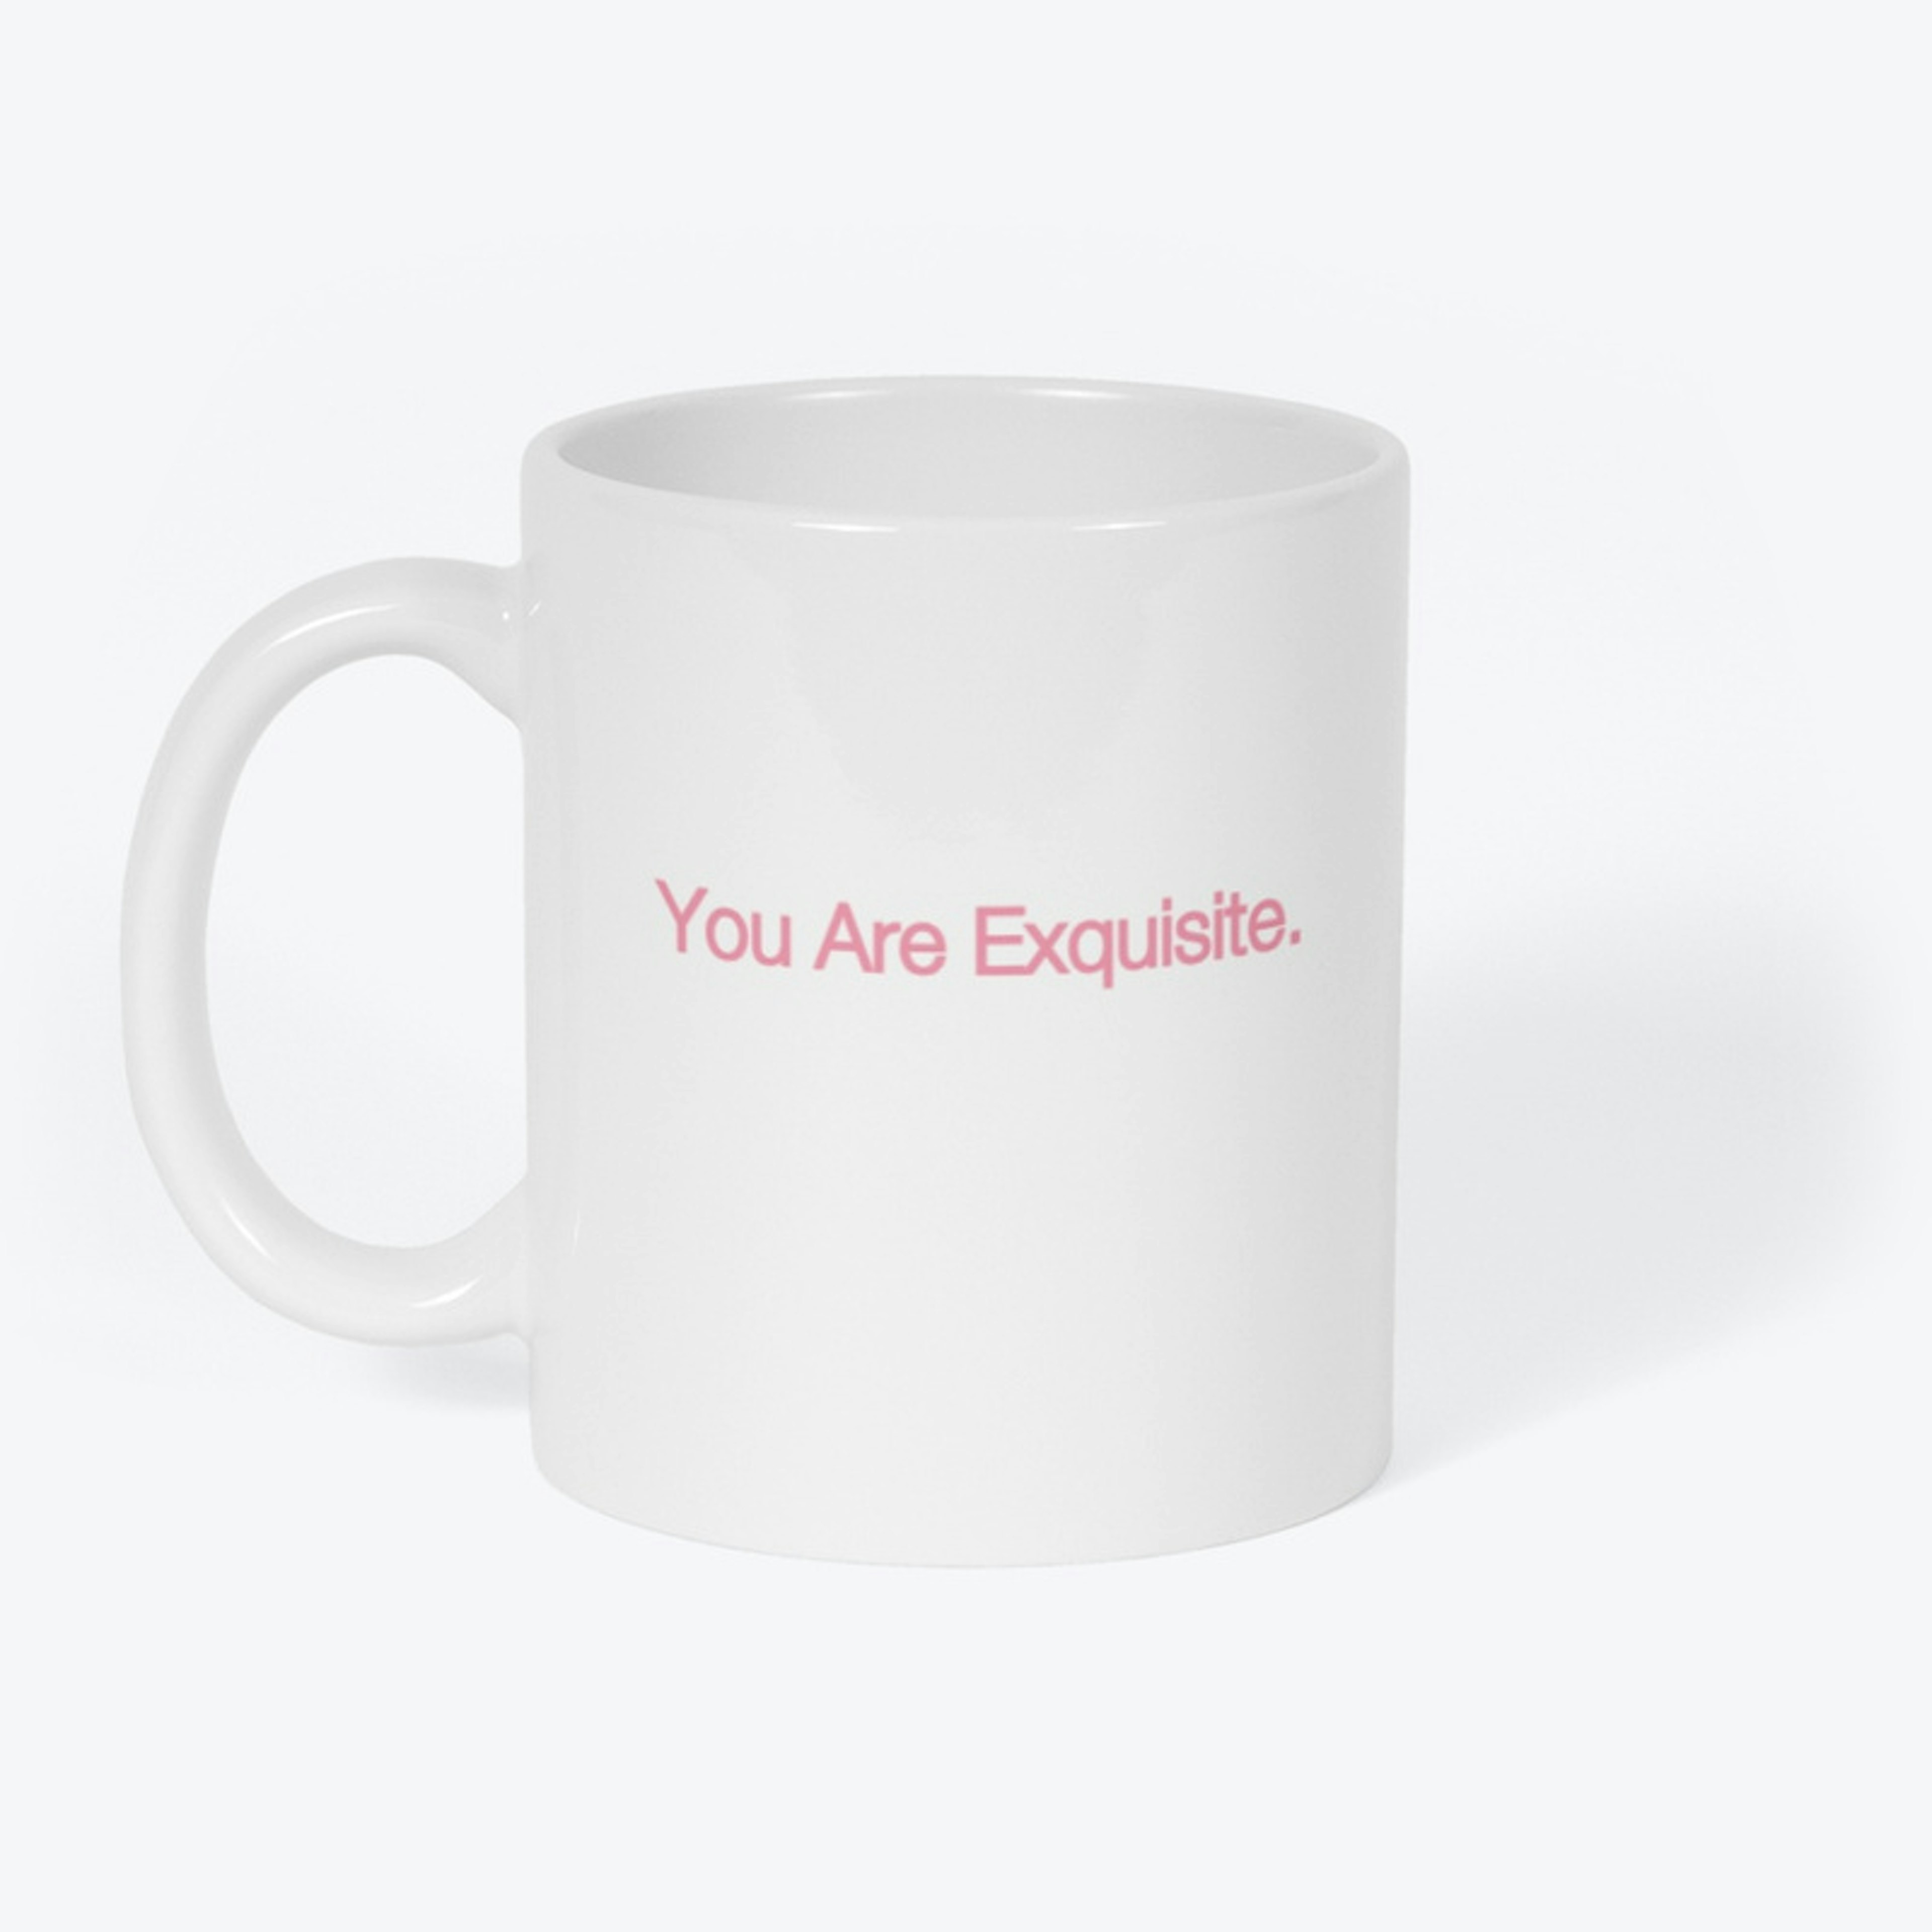 You Are Exquisite.